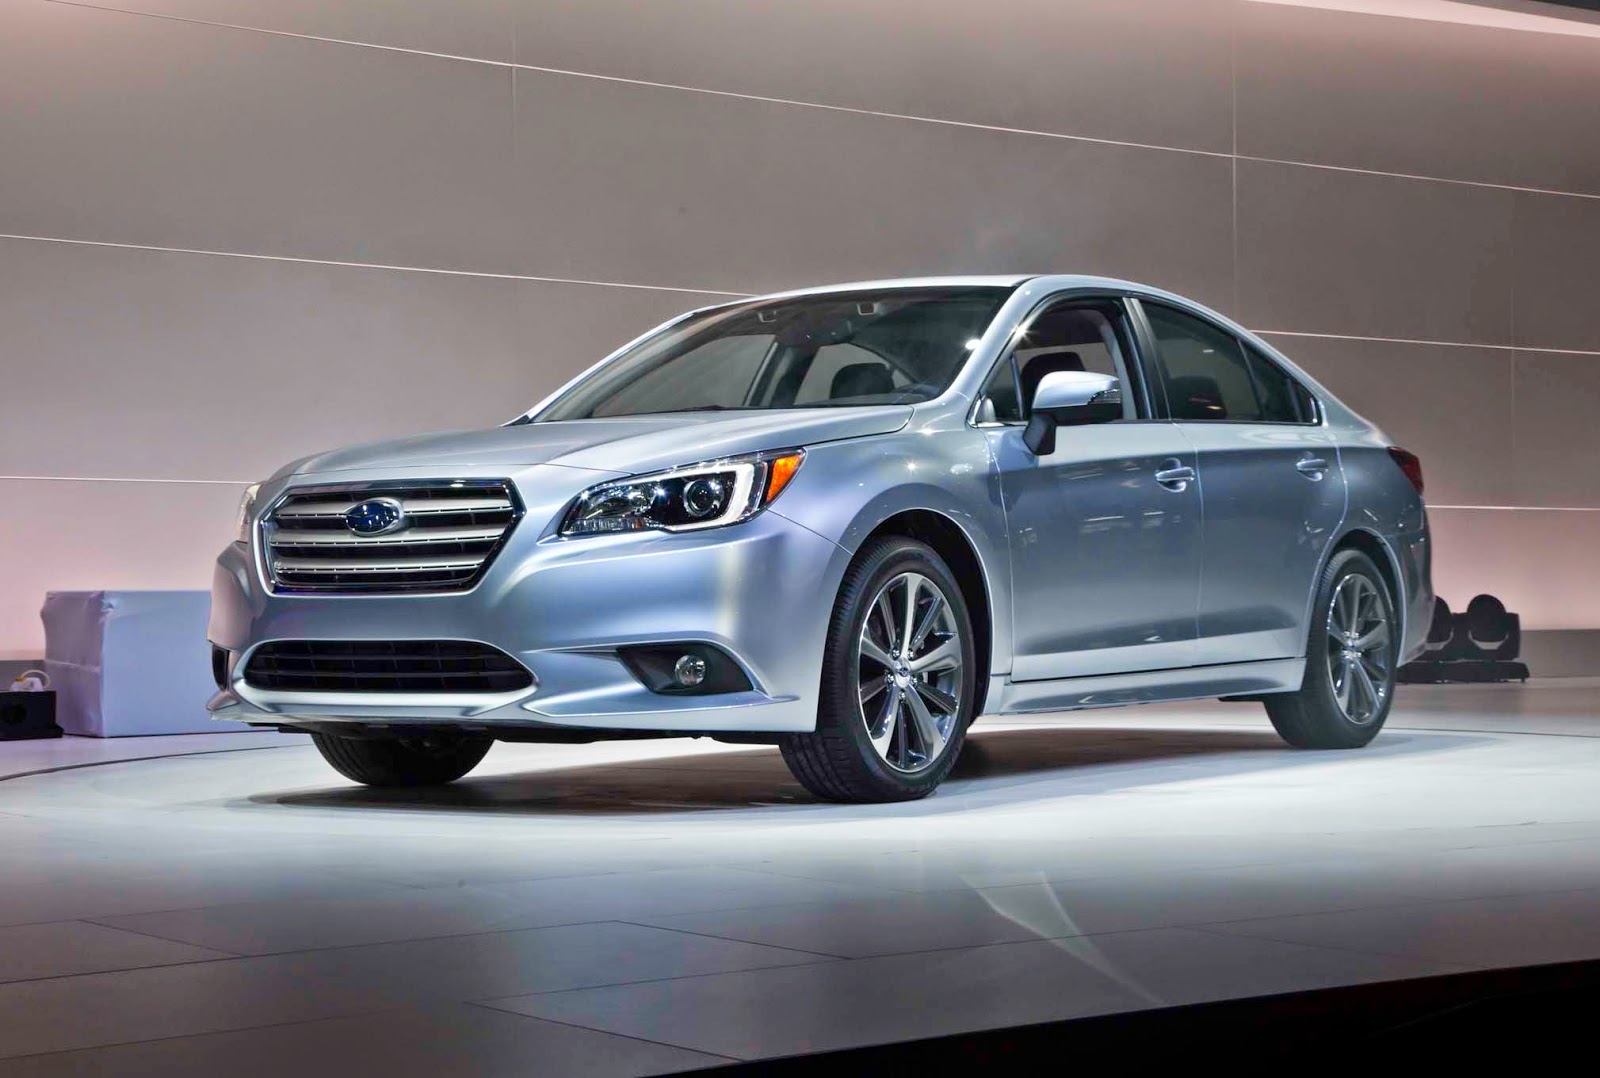 2015 Subaru Legacy Release Date, Price, Concept and Specs